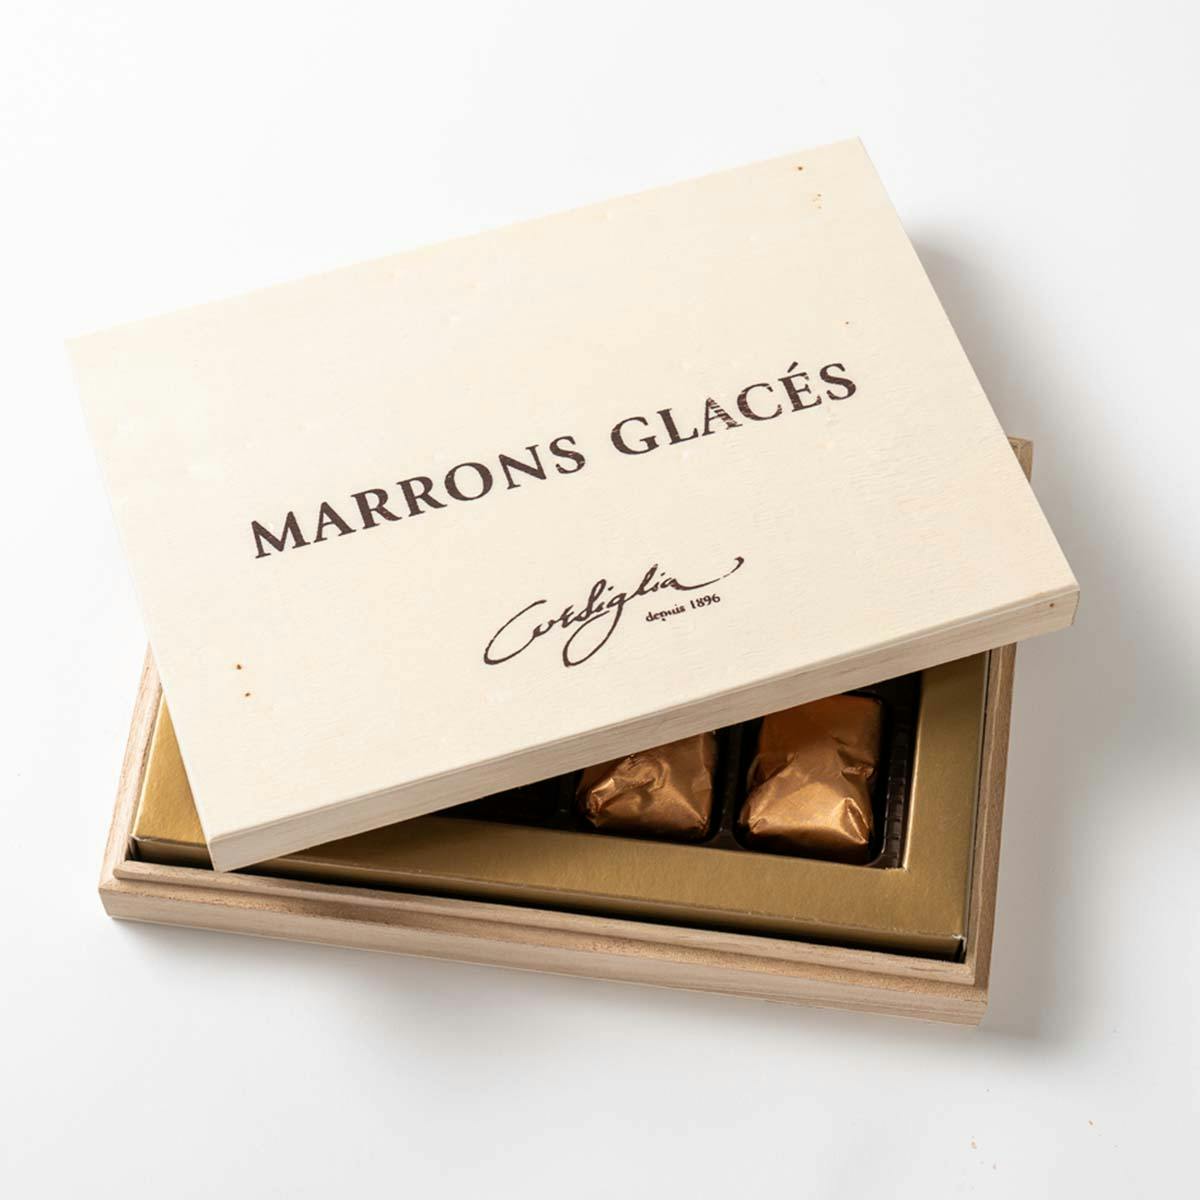 Marrons Glacés - 8 Pack by Chef Daniel Boulud | Goldbelly